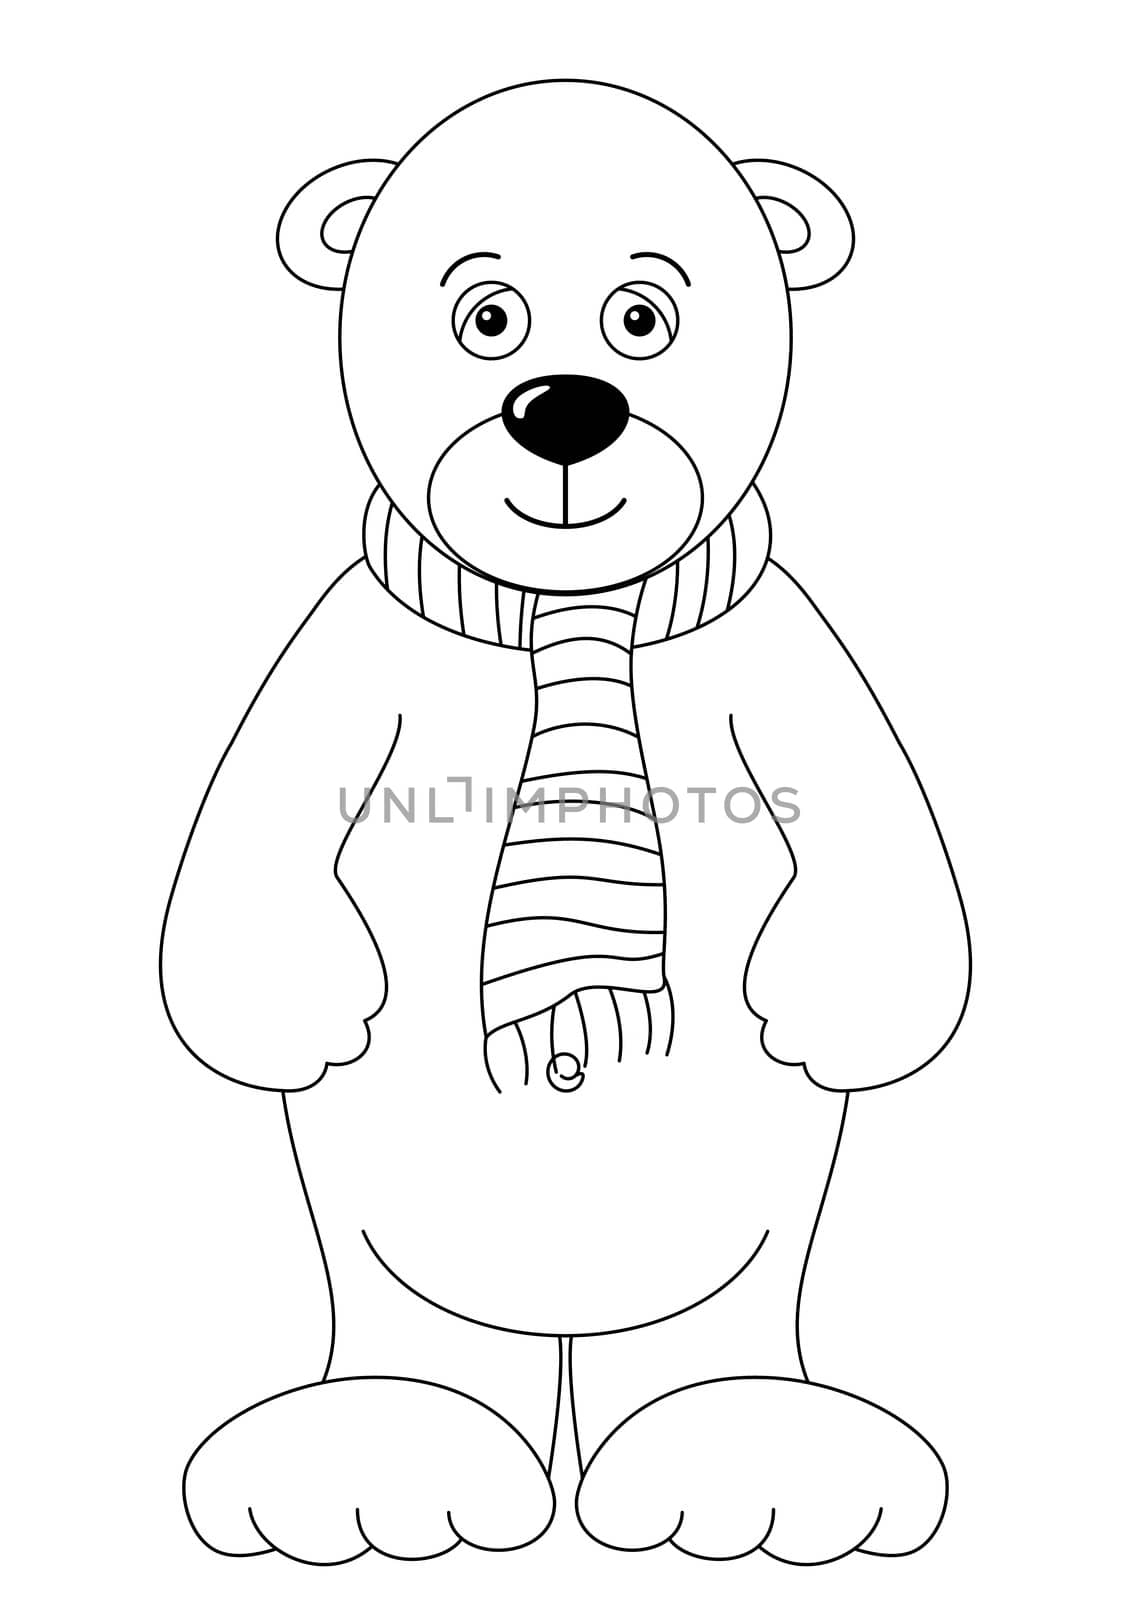 Teddy bear white in a scarf, contours by alexcoolok